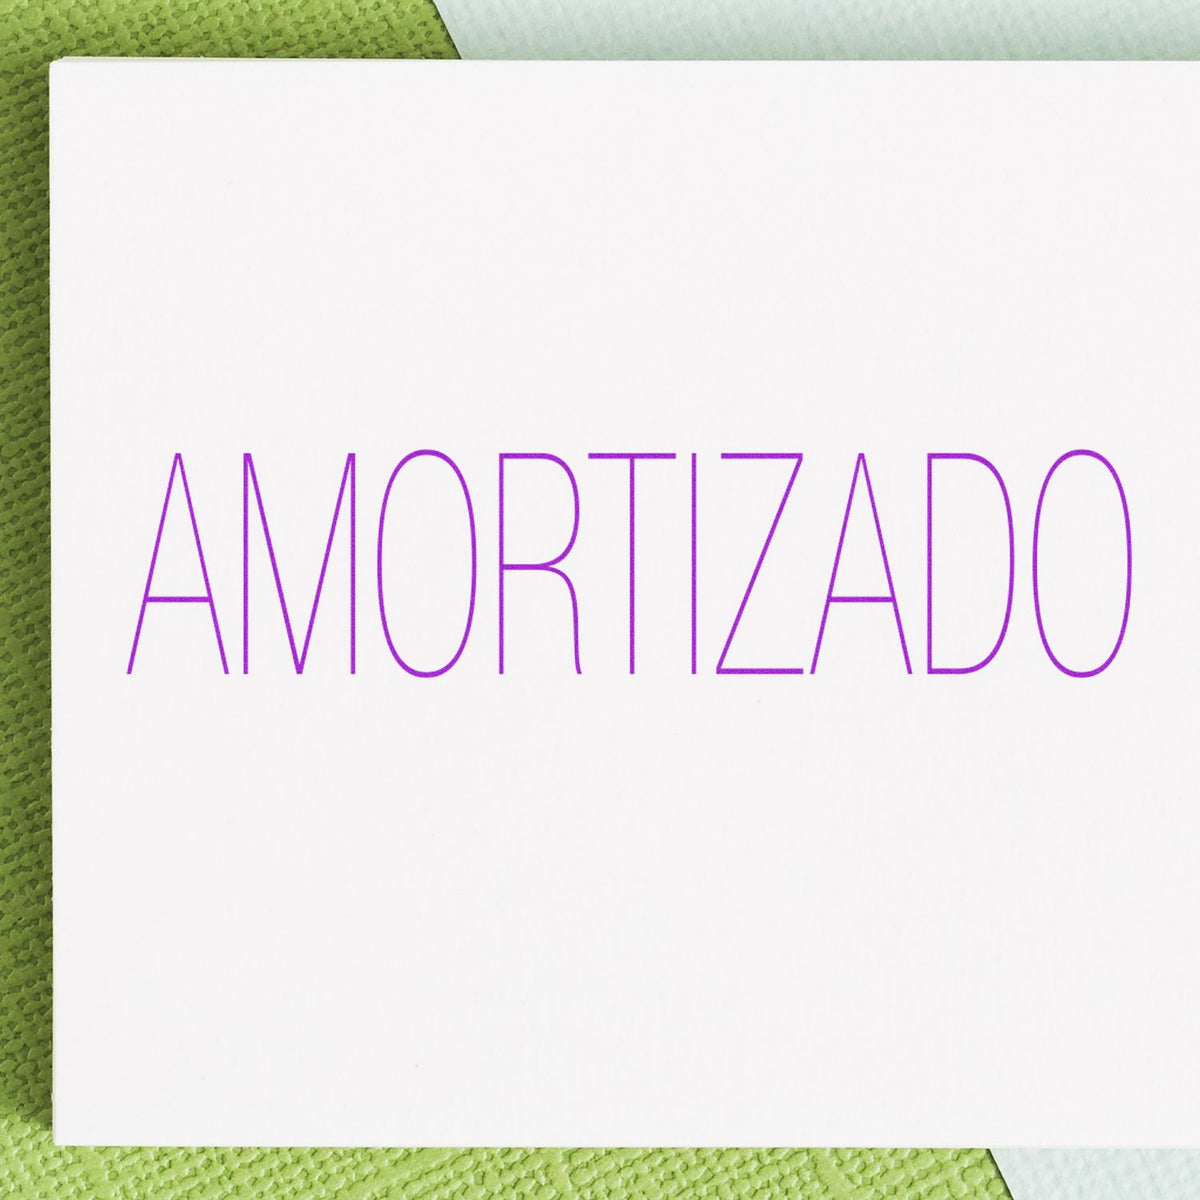 Large Pre-Inked Amortizado Stamp In Use